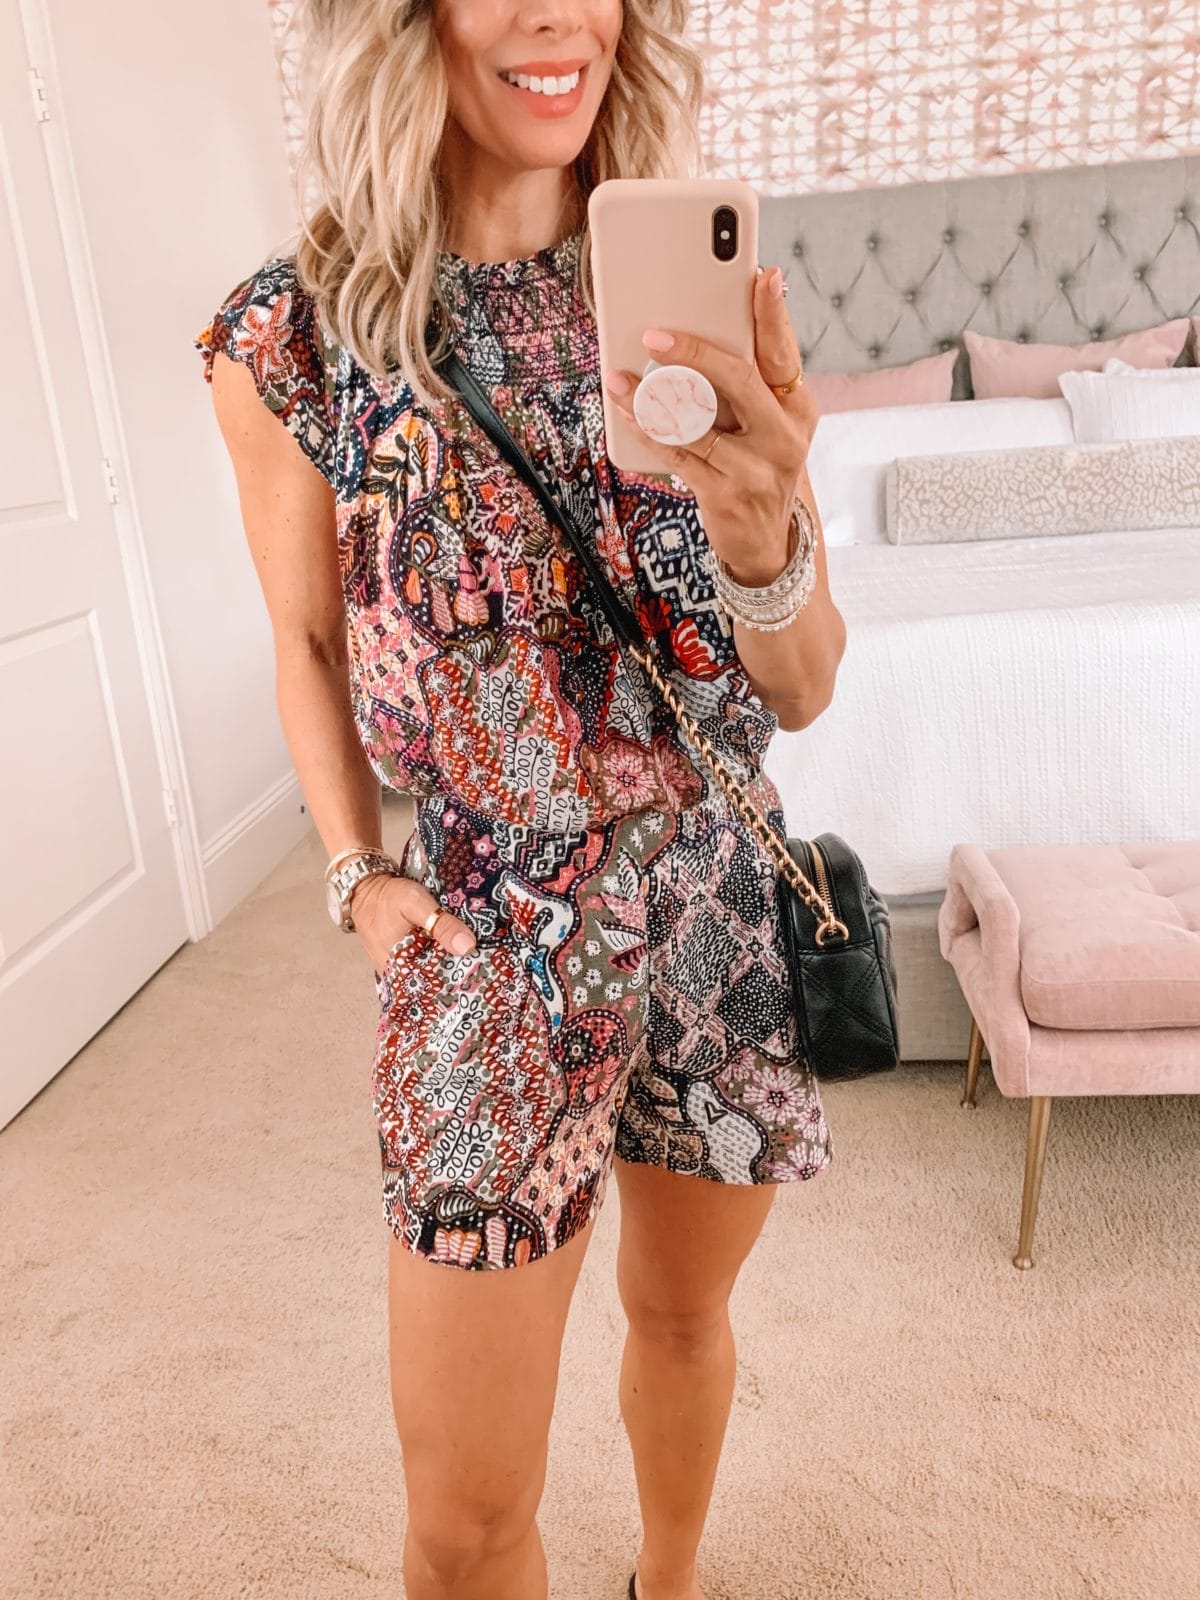 Dressing Room Finds LOFT, Paisley Print TOp and matching Shorts, Crossbody